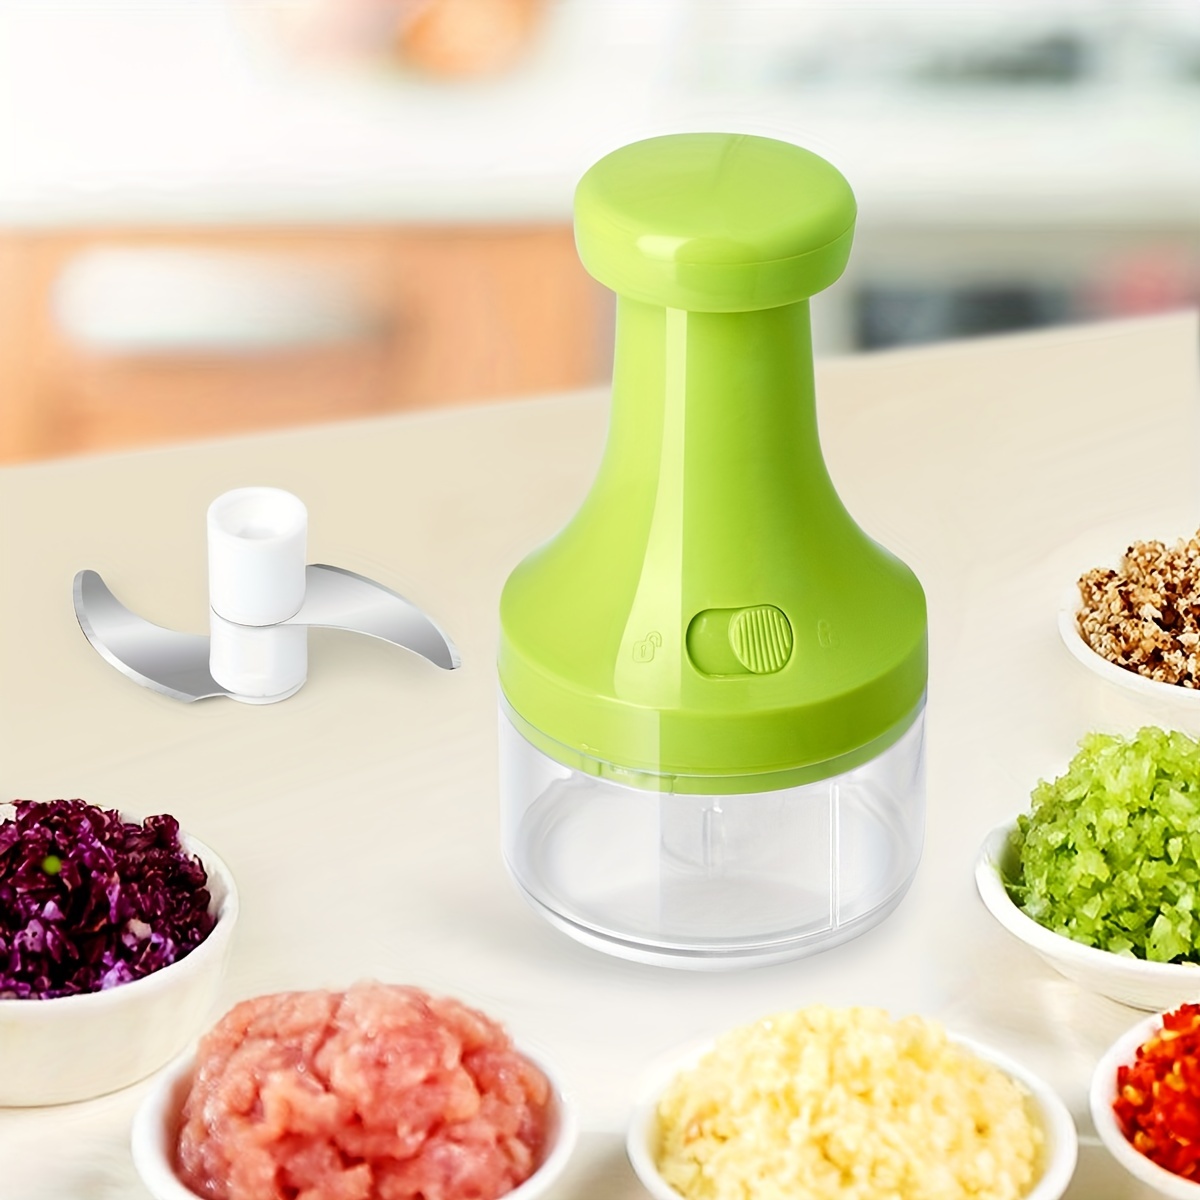 Manual Hand Chopper For Vegetable Multifunction & Food Processor Price in  Pakistan - View Latest Collection of Food Processors